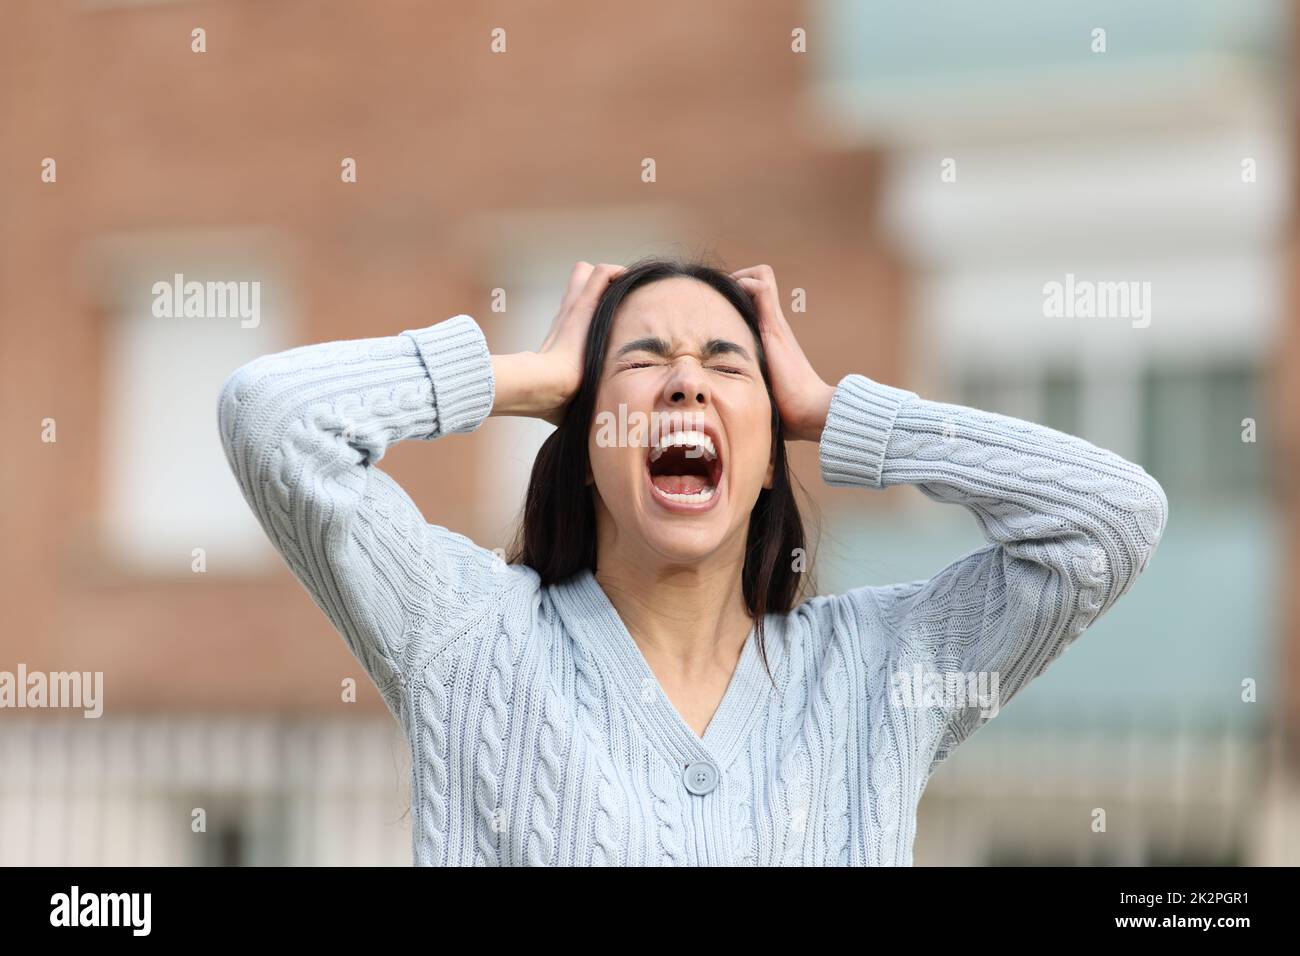 Mad woman yelling in the street Stock Photo